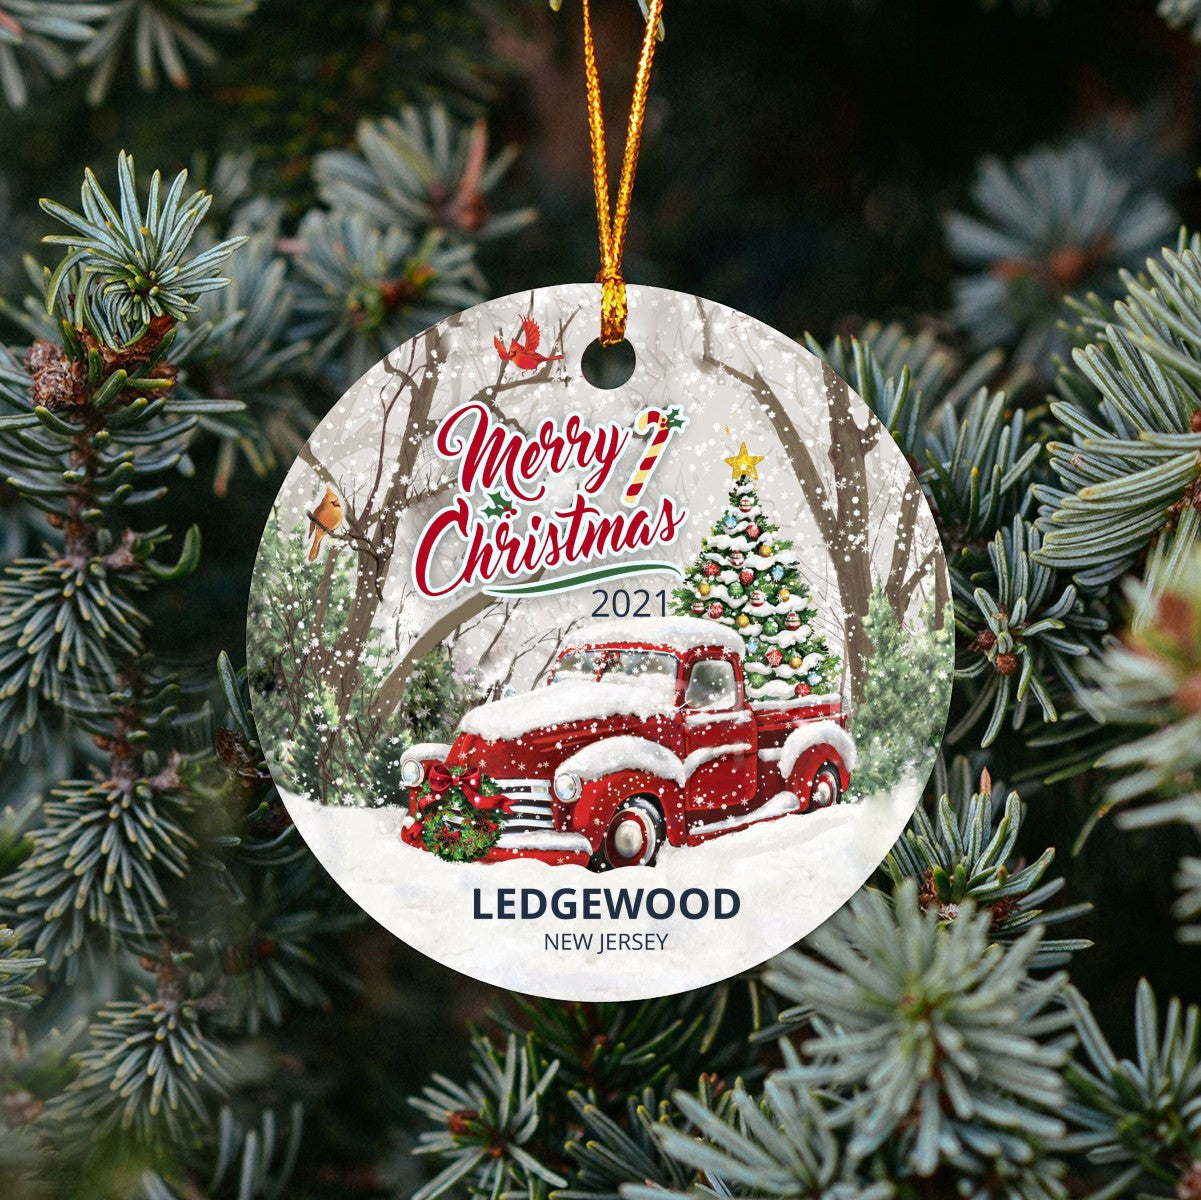 Christmas Tree Ornaments Ledgewood - Ornament With Name City, State Ledgewood New Jersey NJ Ornament - Red Truck Xmas Ornaments 3'' Plastic Gift For Family, Friend And Housewarming